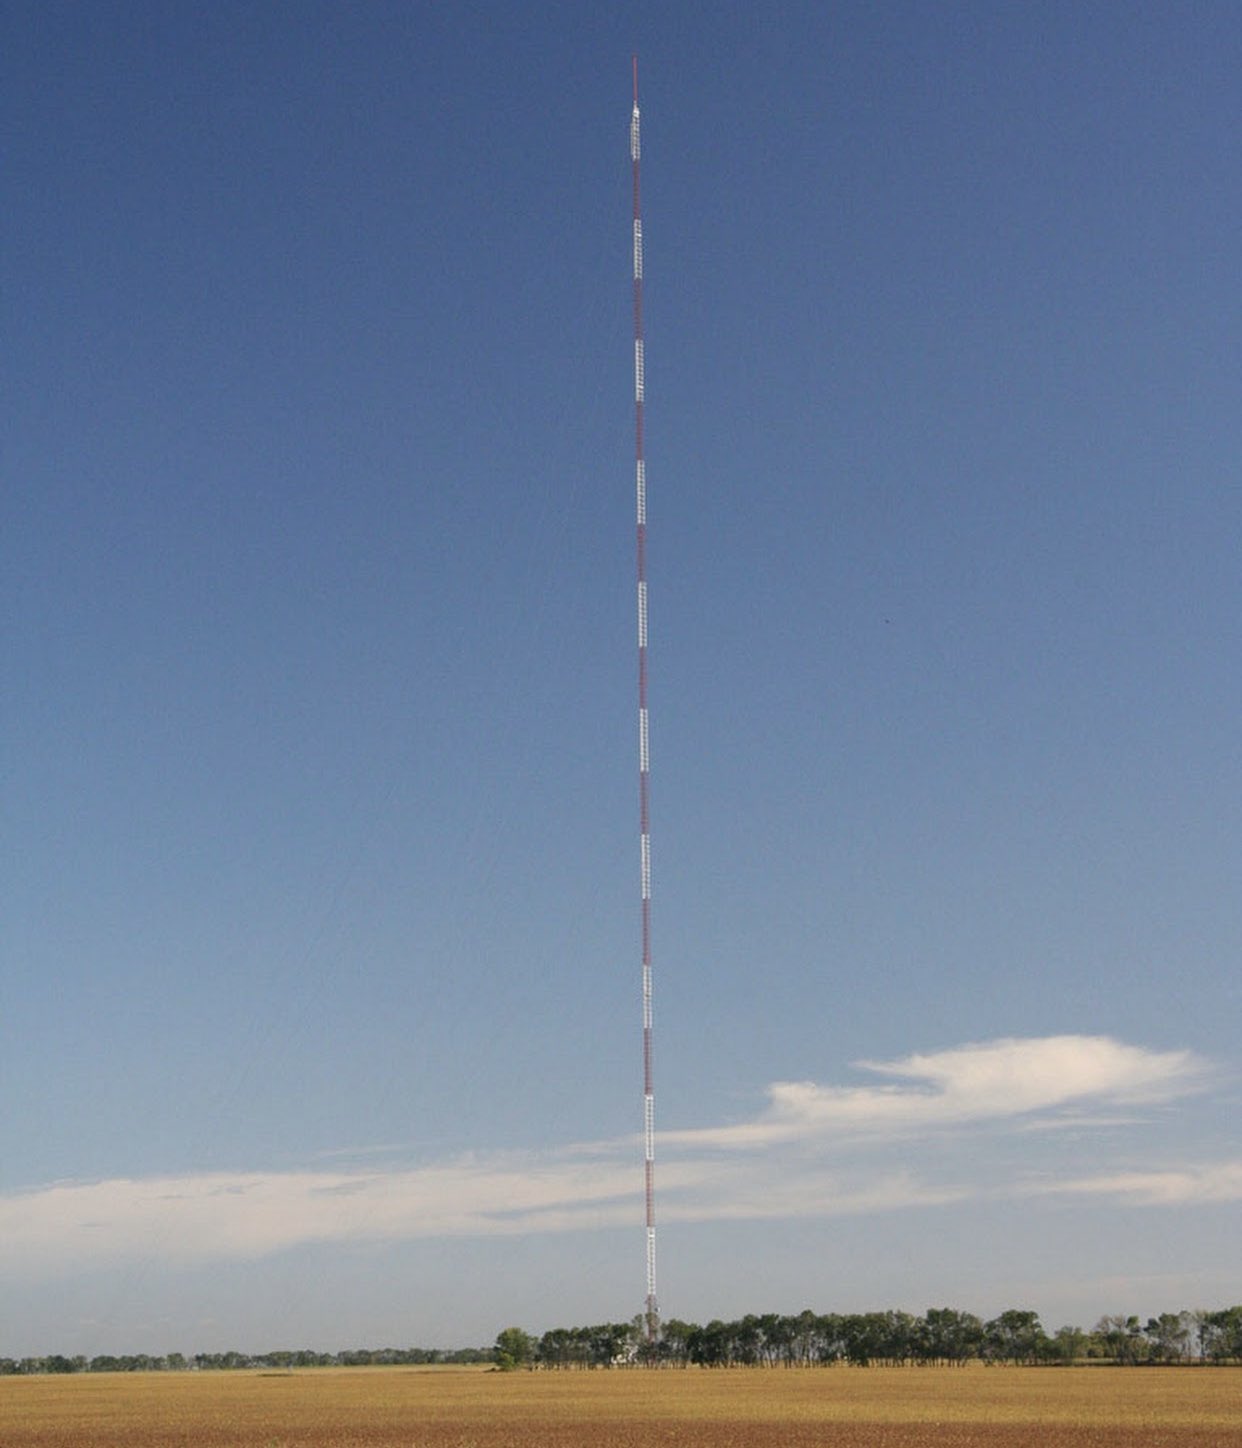 World of on Twitter: "This on August 8, 1991 – The Warsaw radio mast, at time the tallest construction ever built, collapses. https://t.co/m5q0W1bcbv" Twitter